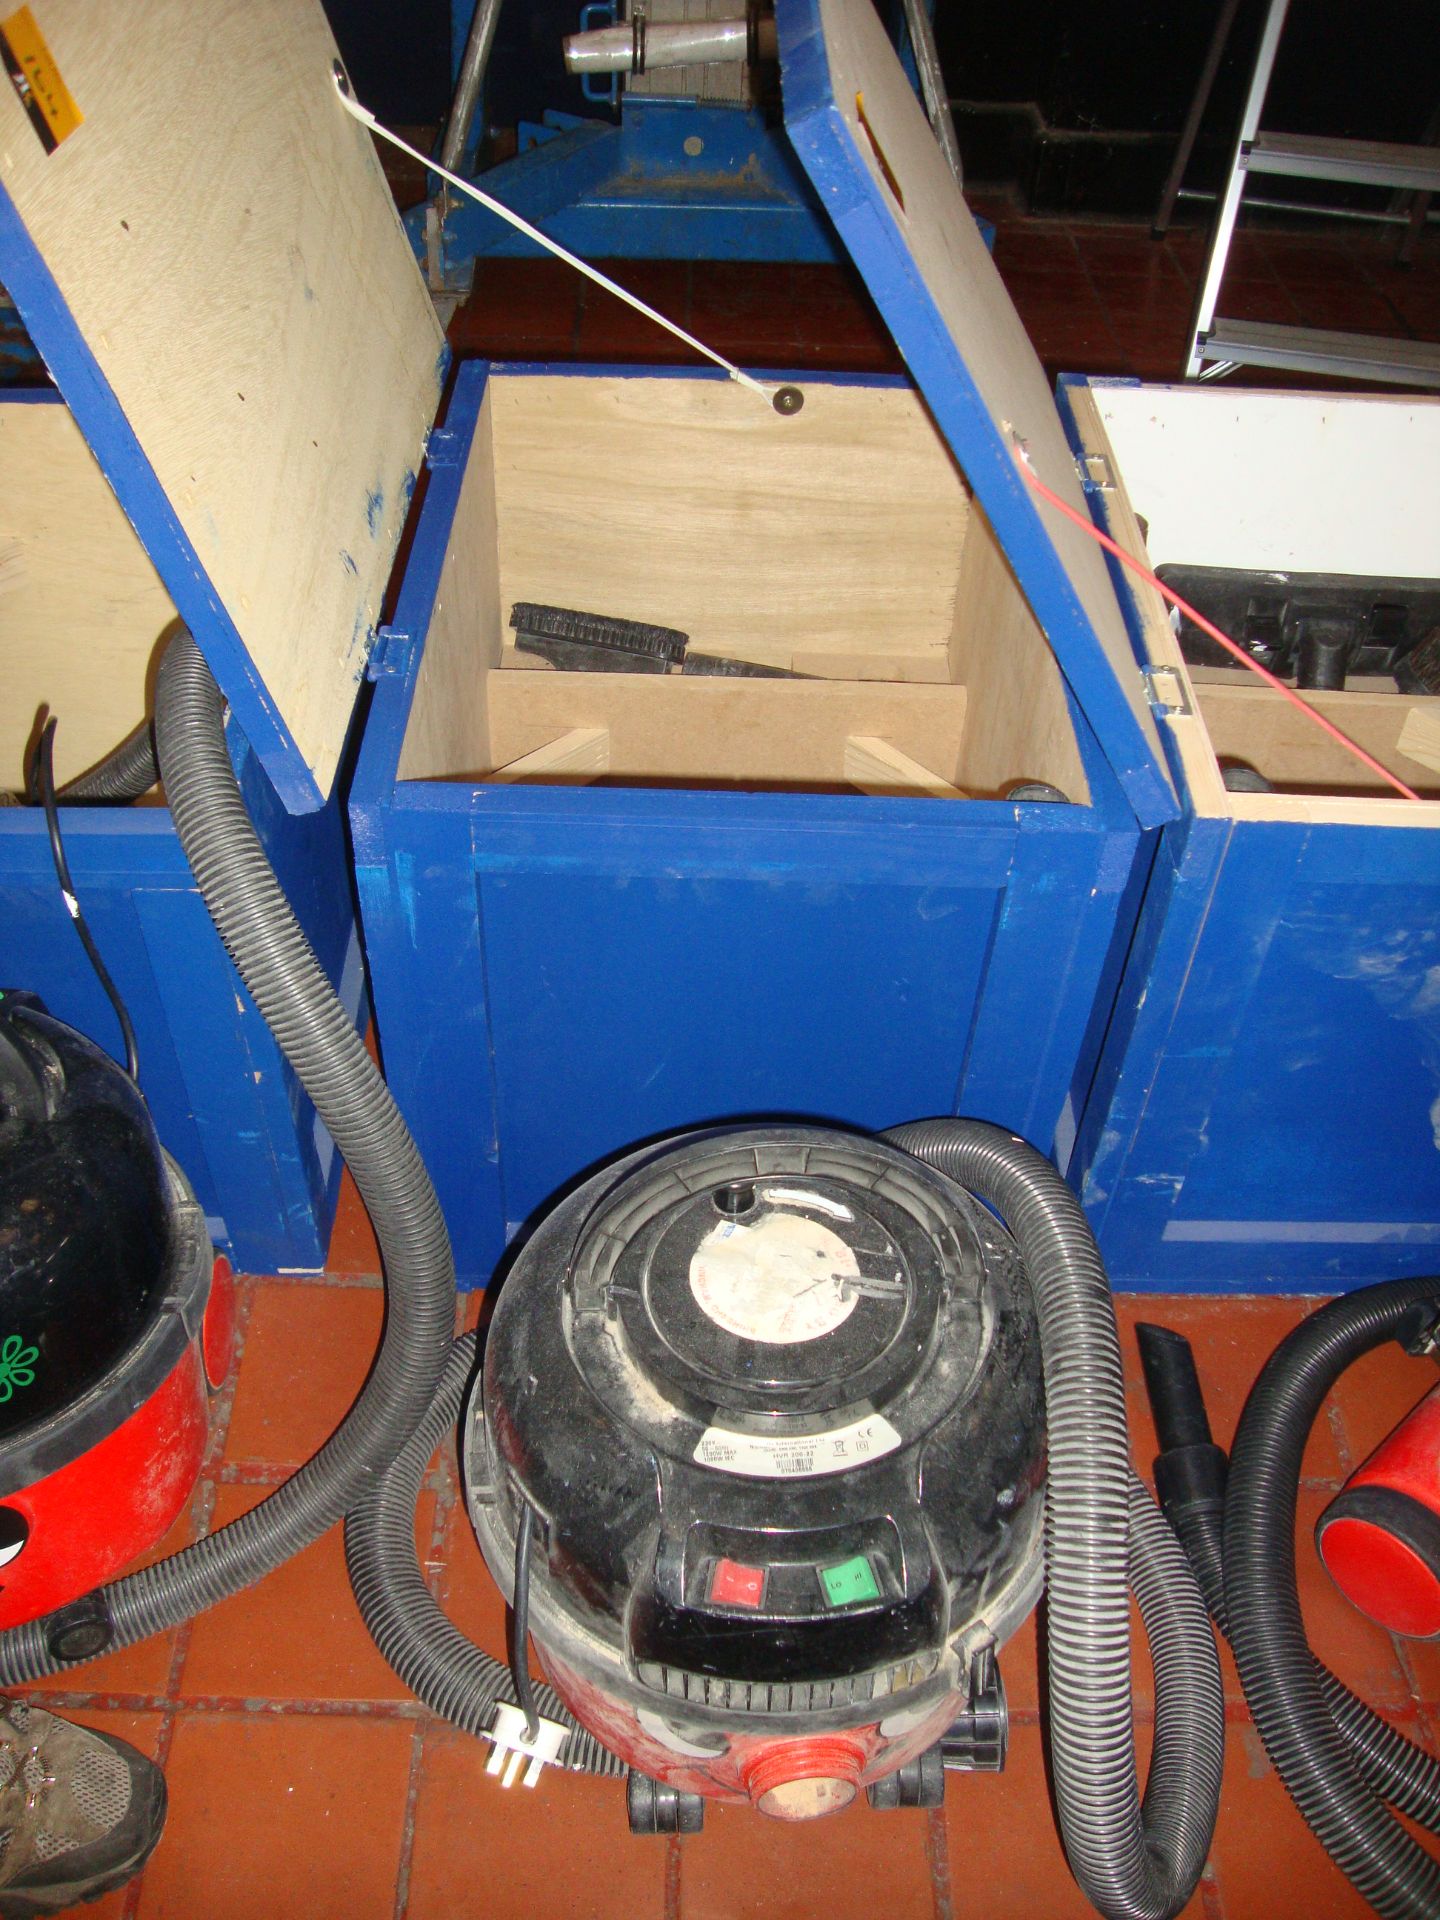 Henry vacuum cleaner in its own custom-built dedicated wooden box, including accessories as pictured